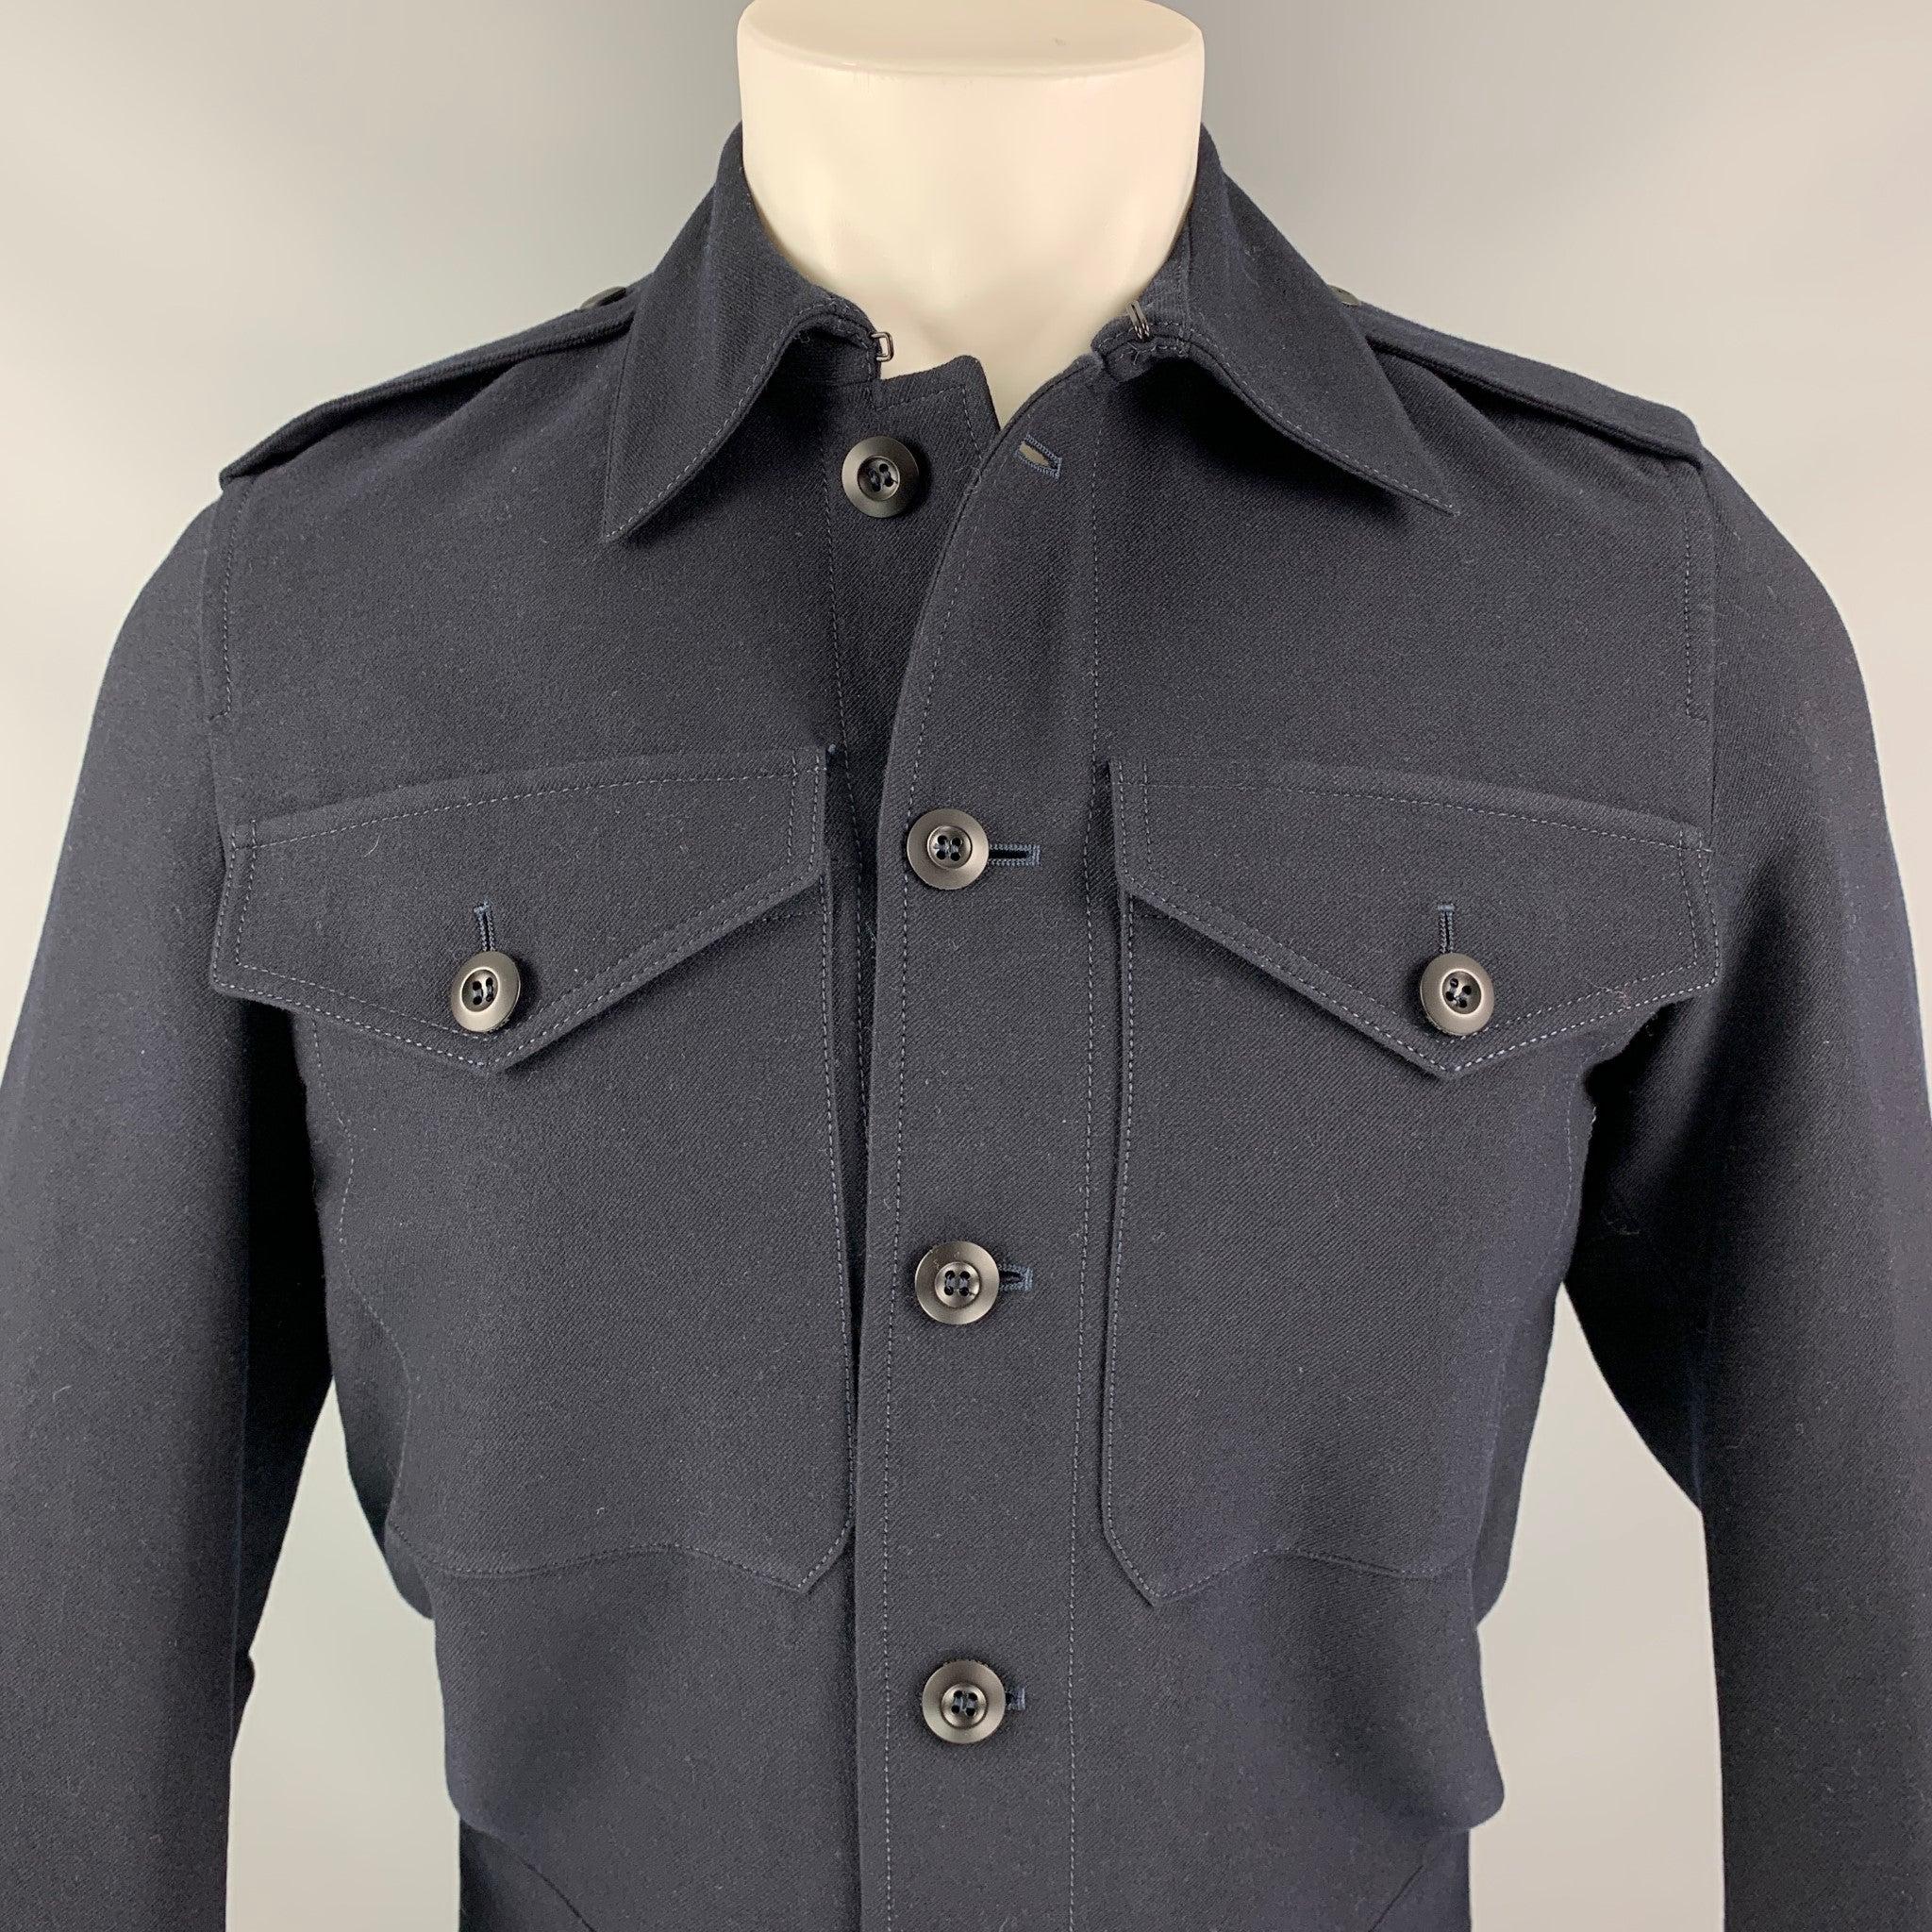 BURBERRY PRORSUM Spring 2015 Size 38 Navy Blue Cashmere Blend Jacket In Good Condition For Sale In San Francisco, CA